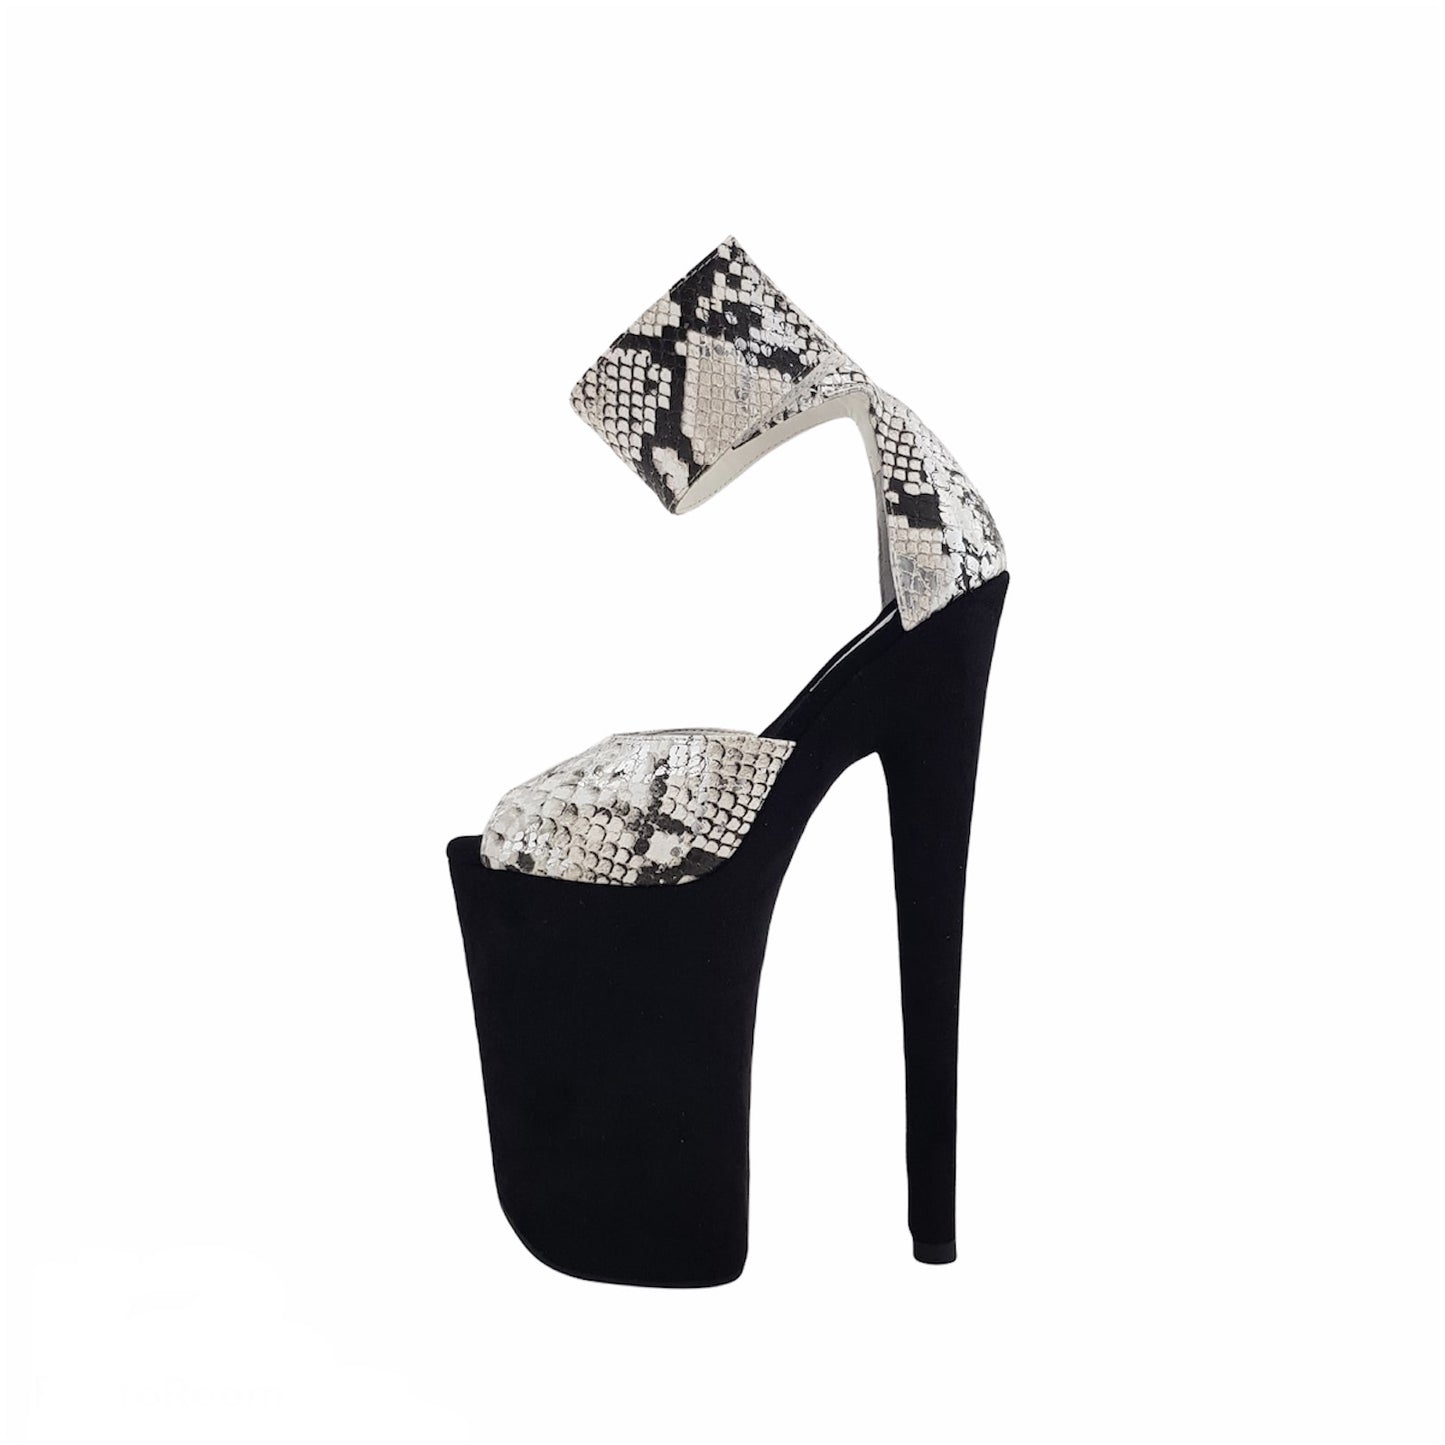 Classic snakeskin black vegan suede platform ankle cuff sandals (more colors are available)